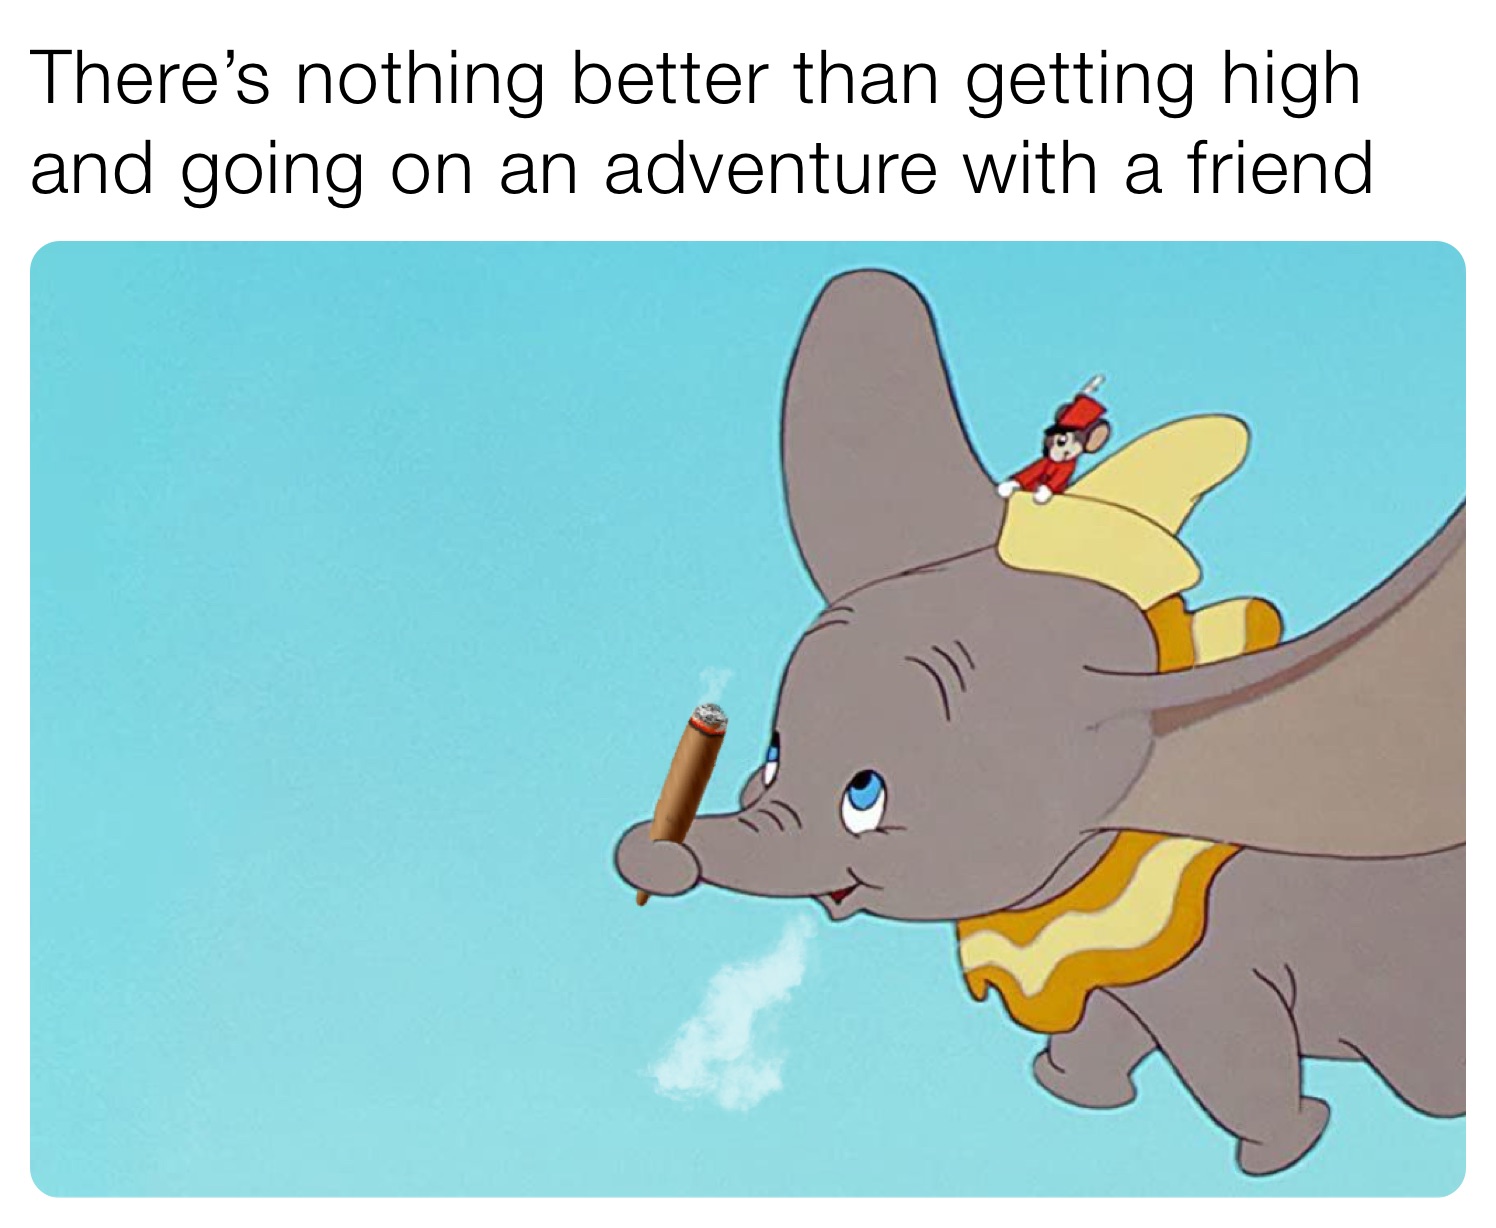 There’s nothing better than getting high and going on an adventure with a friend 